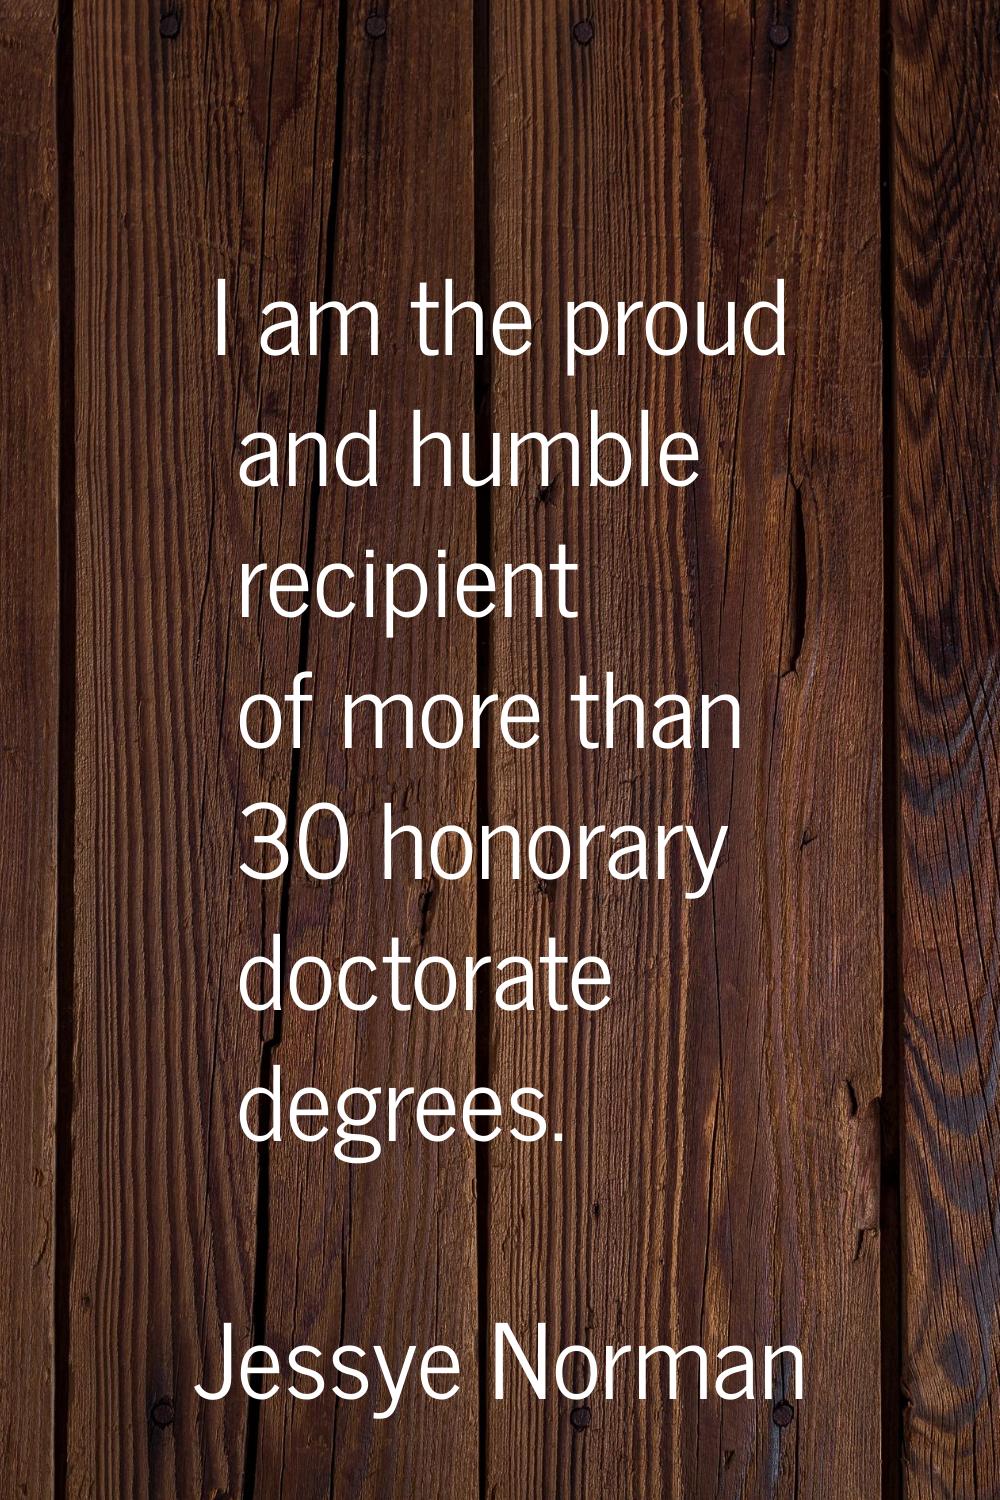 I am the proud and humble recipient of more than 30 honorary doctorate degrees.